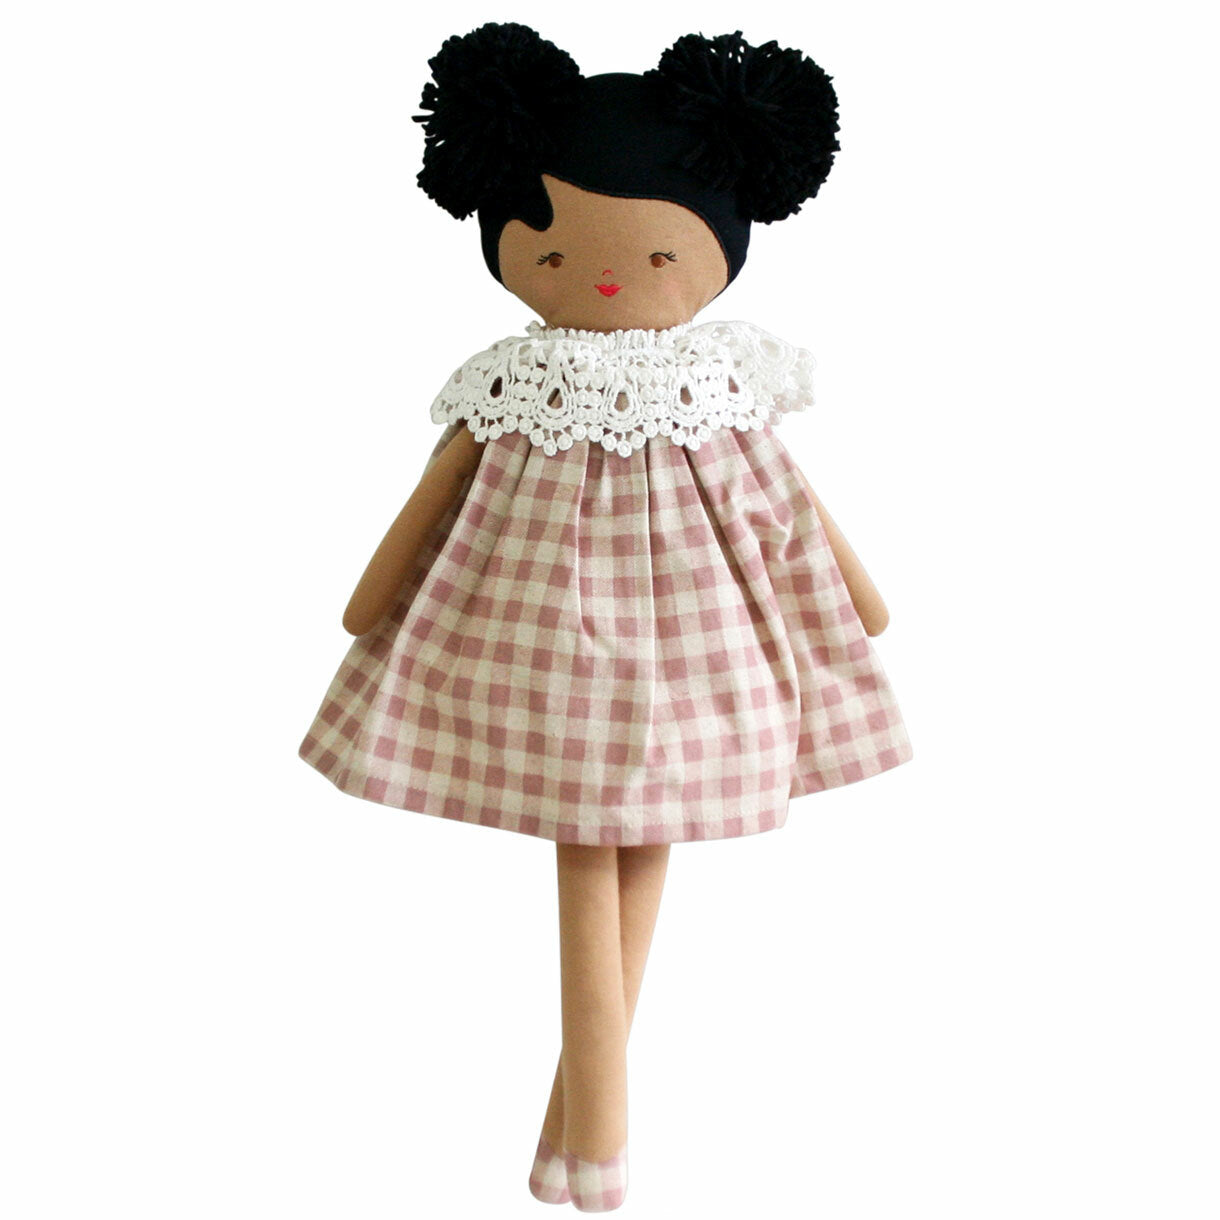 SpearmintLOVE’s baby Aggie Doll, Rose Check